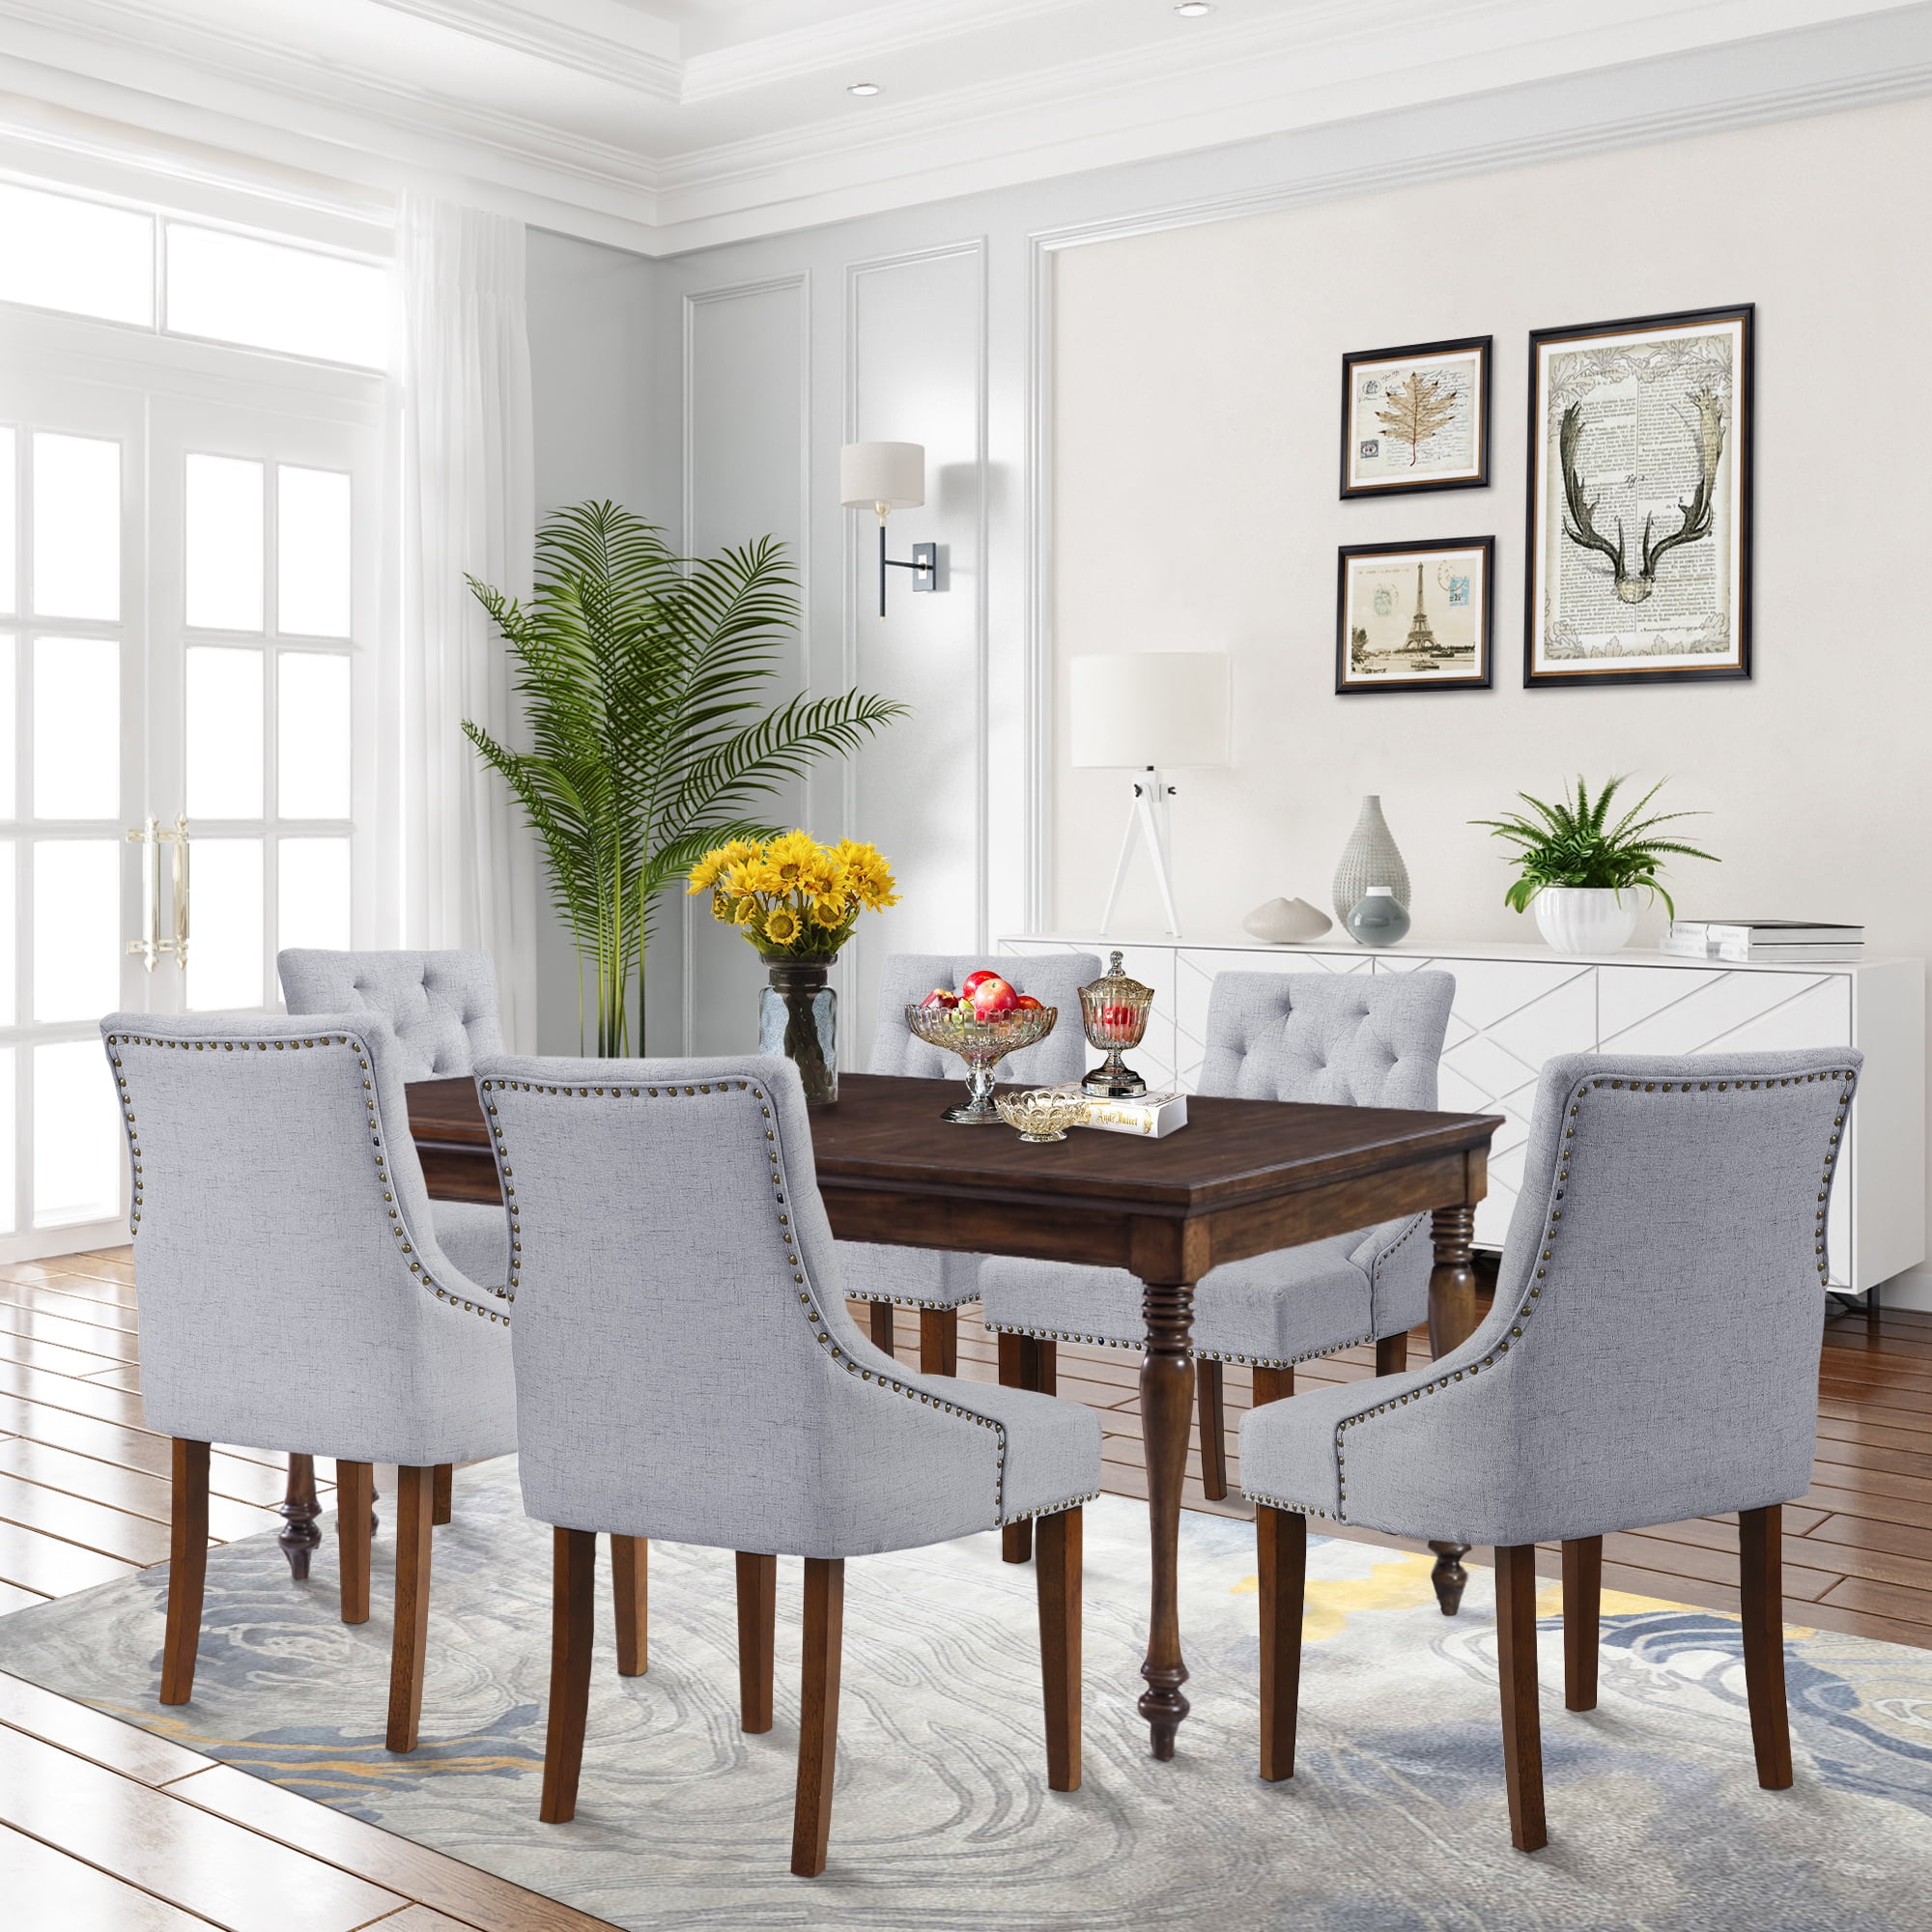 Most Comfortable Dining Room Chairs : Most Comfortable Dining Chairs